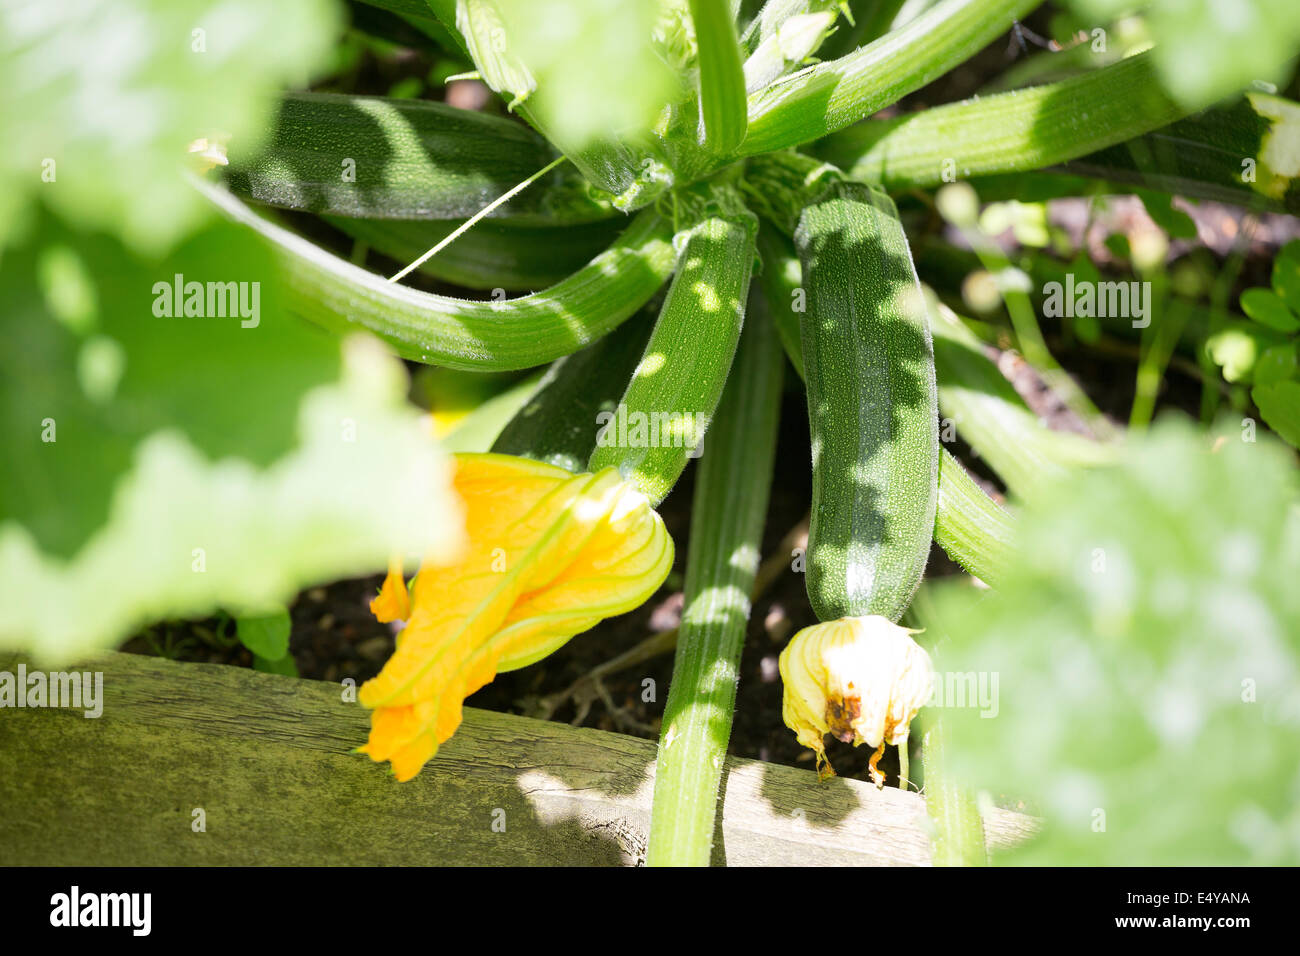 Courgette 'El Greco' growing in a raised bed in a garden in Northamptonshire, England, UK Stock Photo